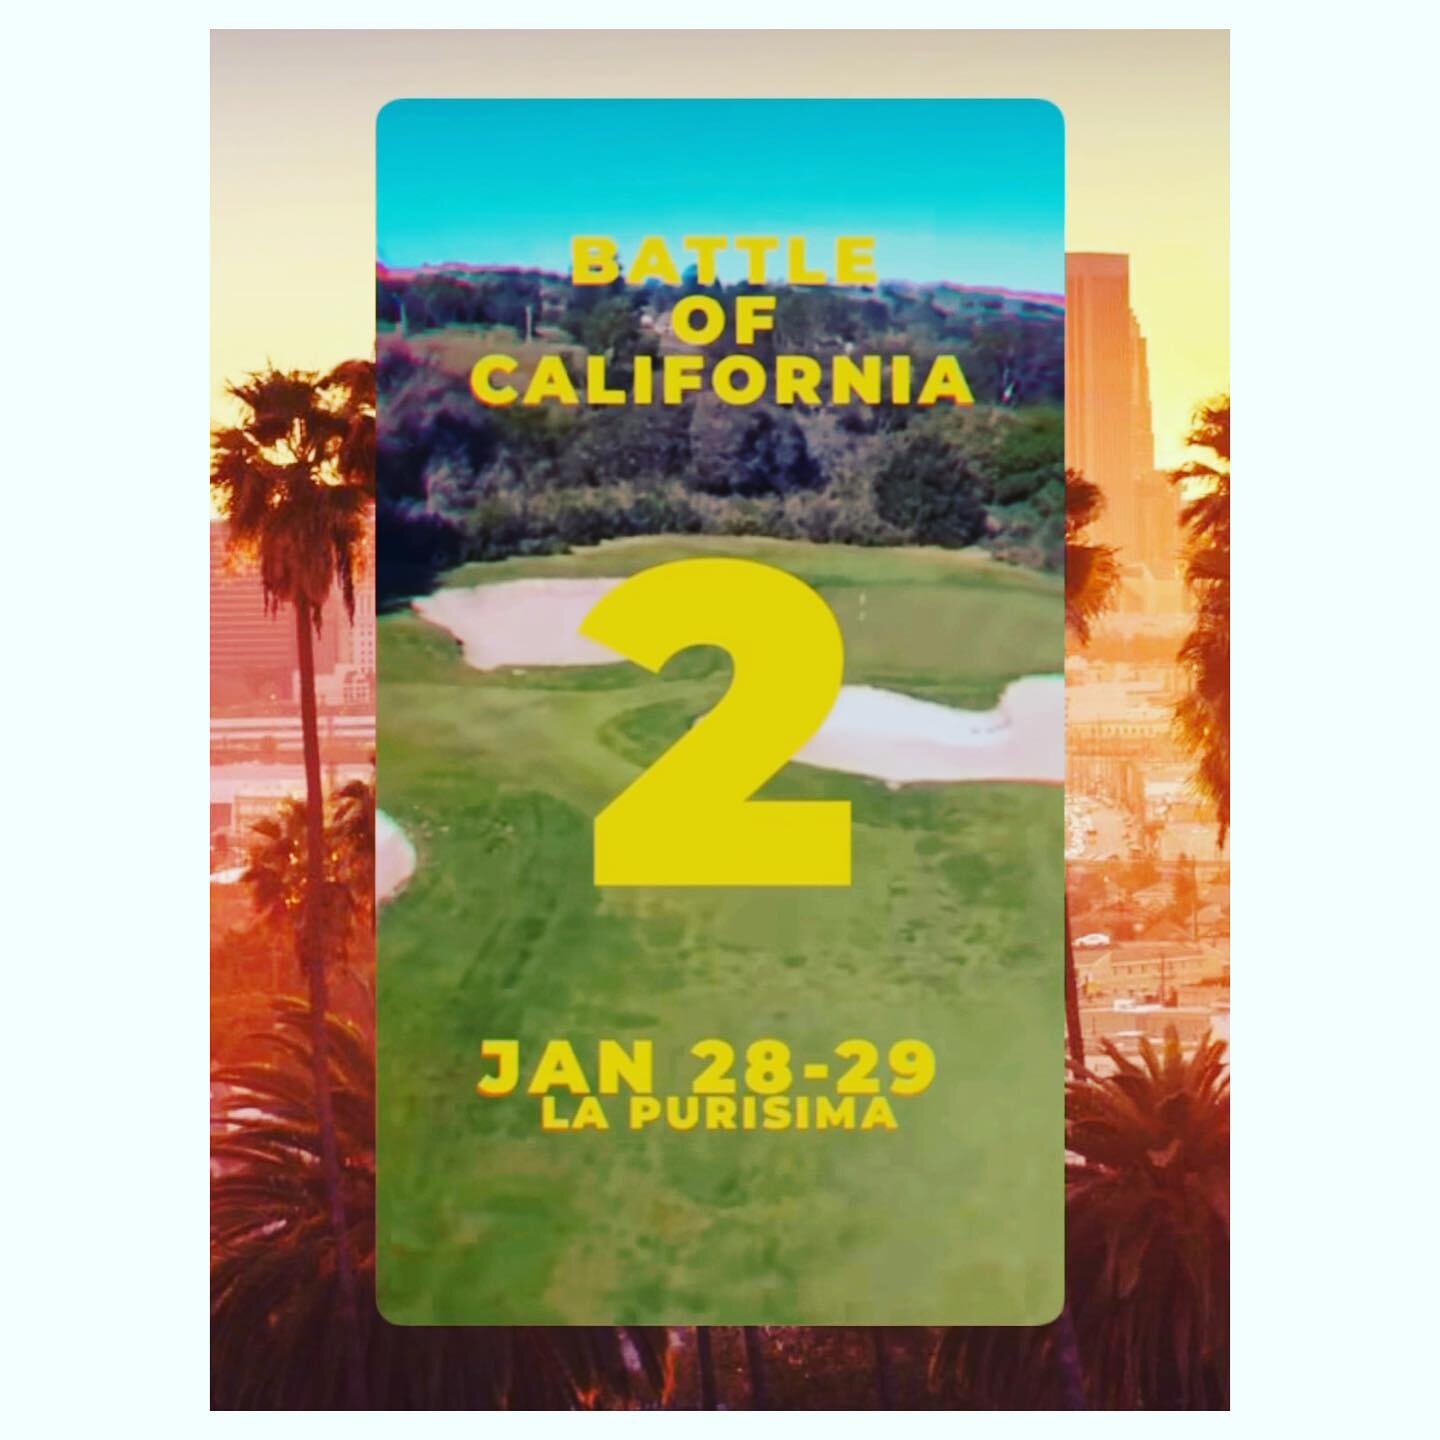 Battle of CA II
Jan 28-29, 2023
La Purisima GC
NorCal (@norcalgolfguys) v. SoCal (@westsidegolfcollective @memberswithoutdues @tropicanagolfclubandbarbershop @tinyputters)

SoCal took home the 🏆 in the inaugural year. Will you be there representing 